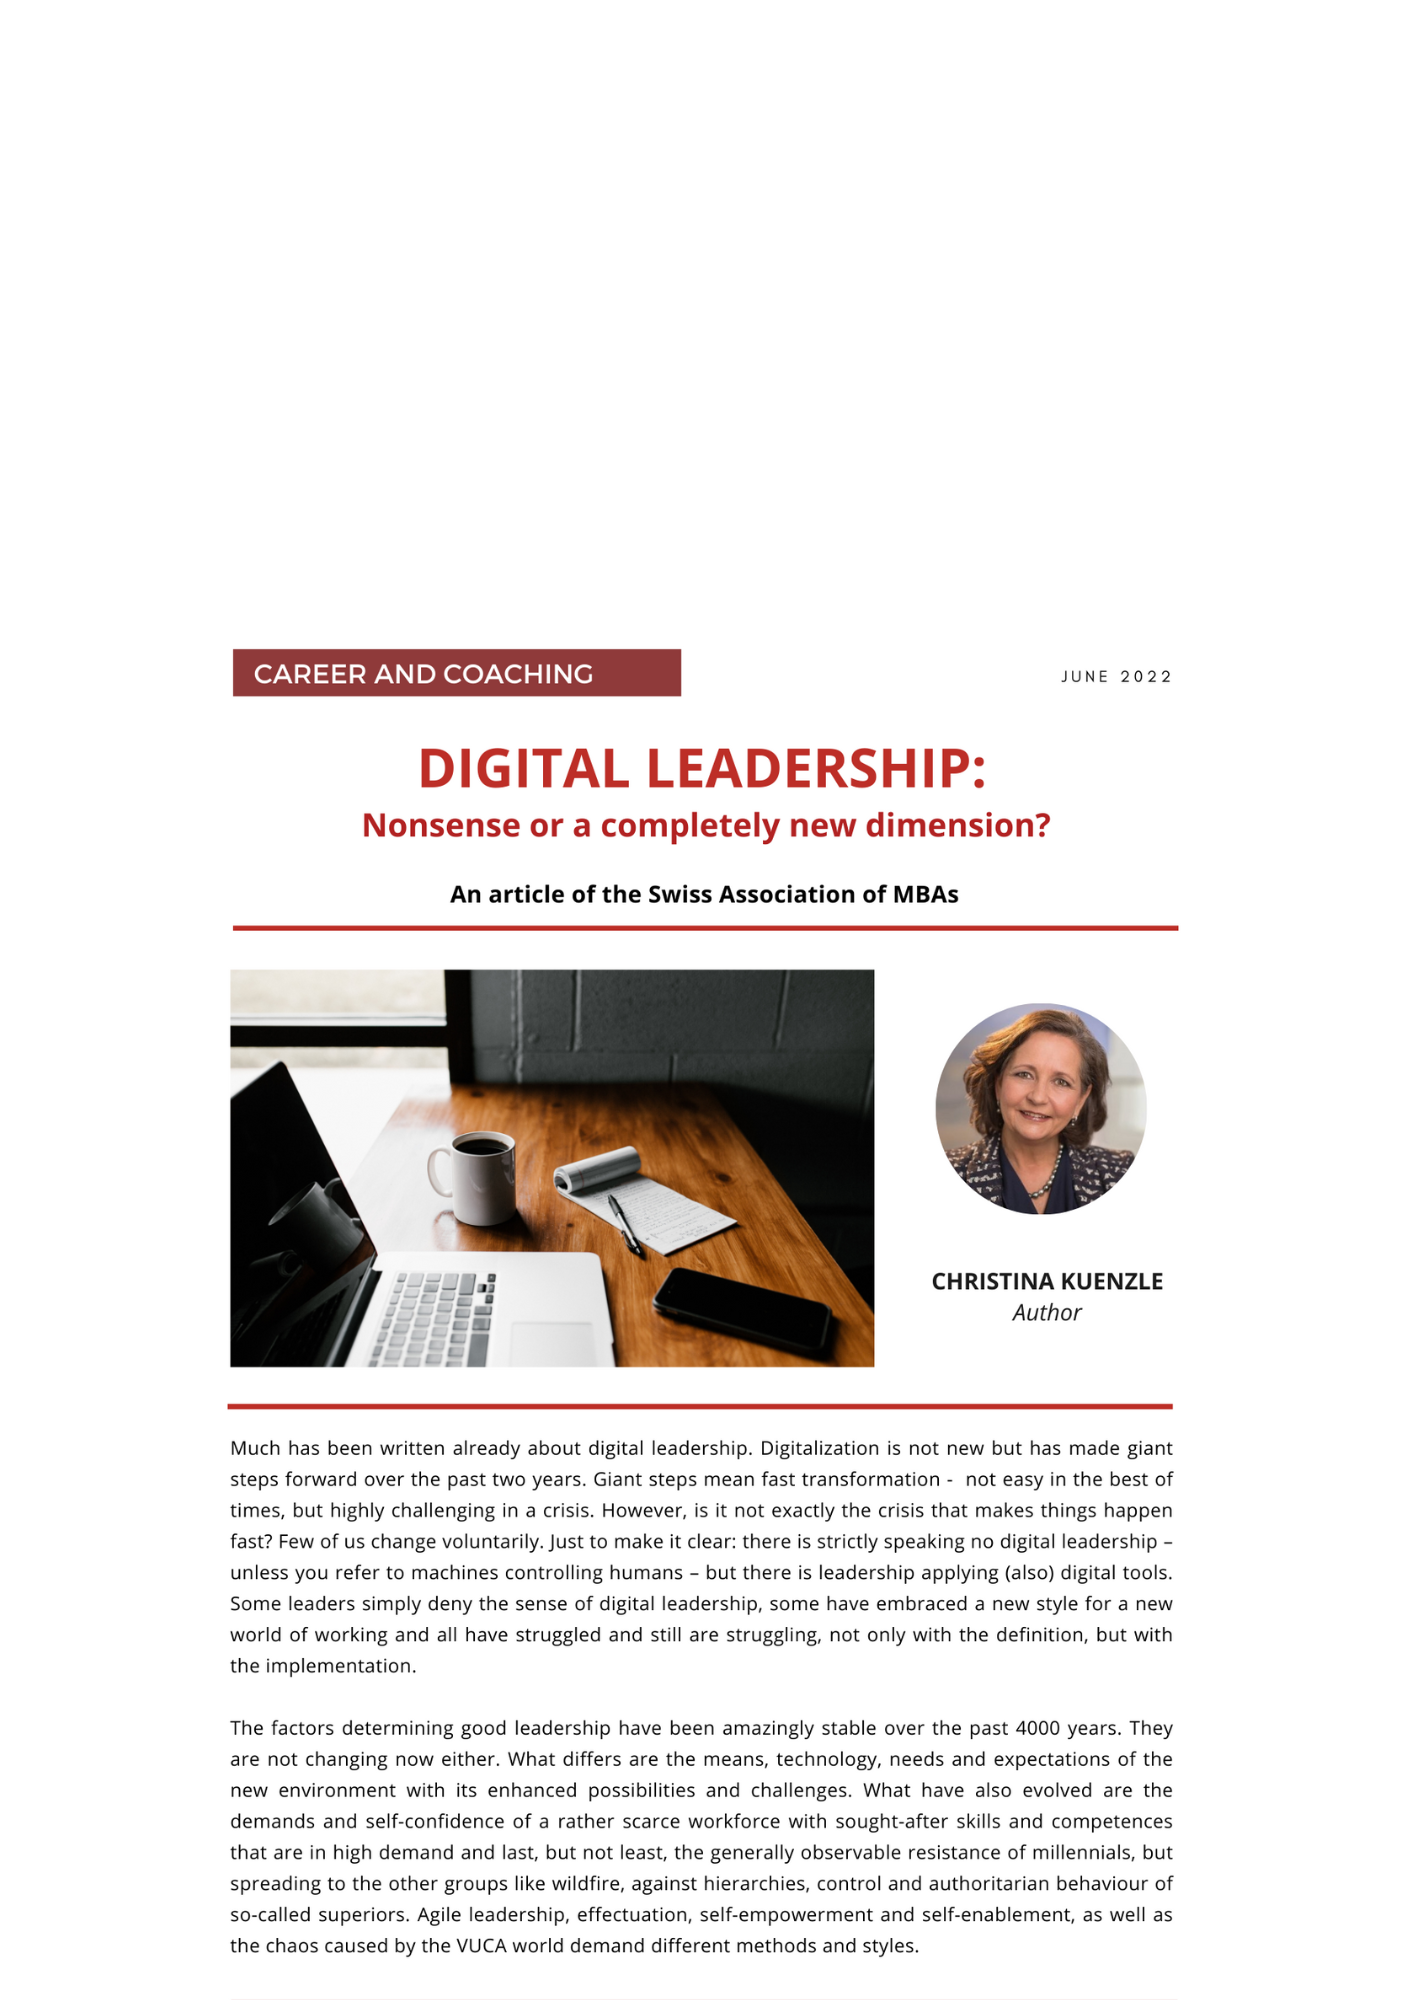 DIGITAL LEADERSHIP: Nonsense or a completely new dimension?